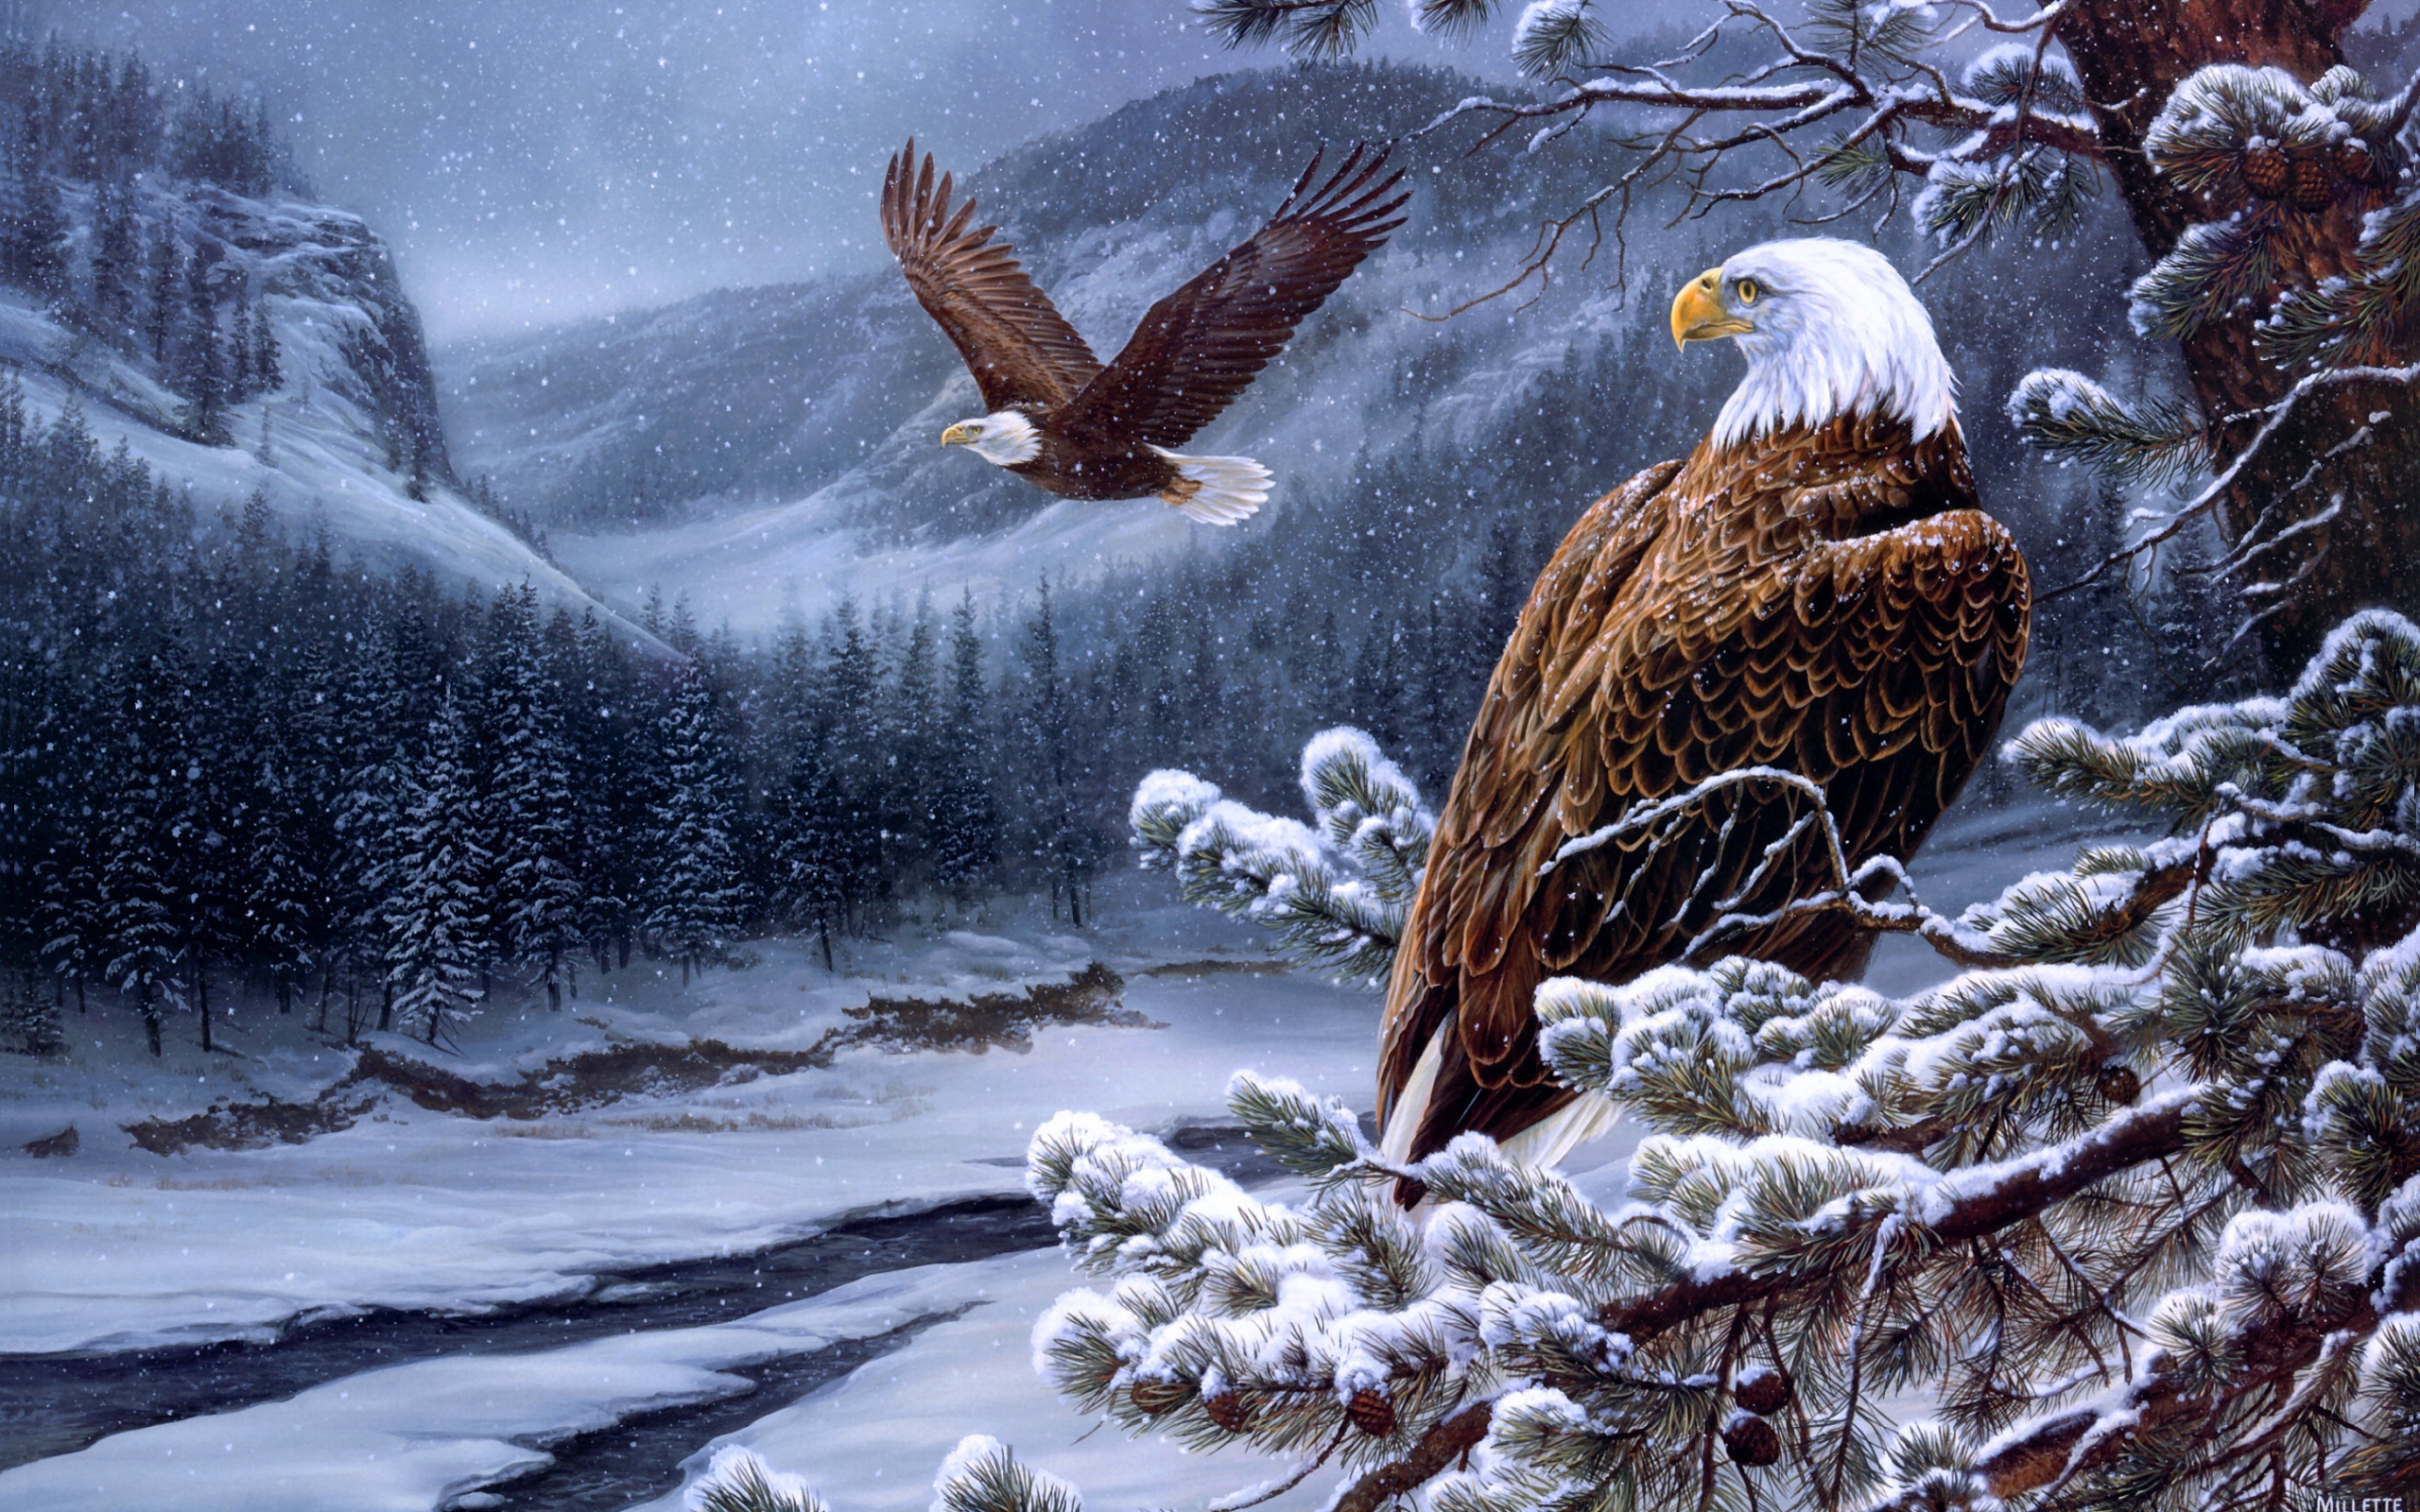 The Wild Bald Eagles Painting Winter River Jpg